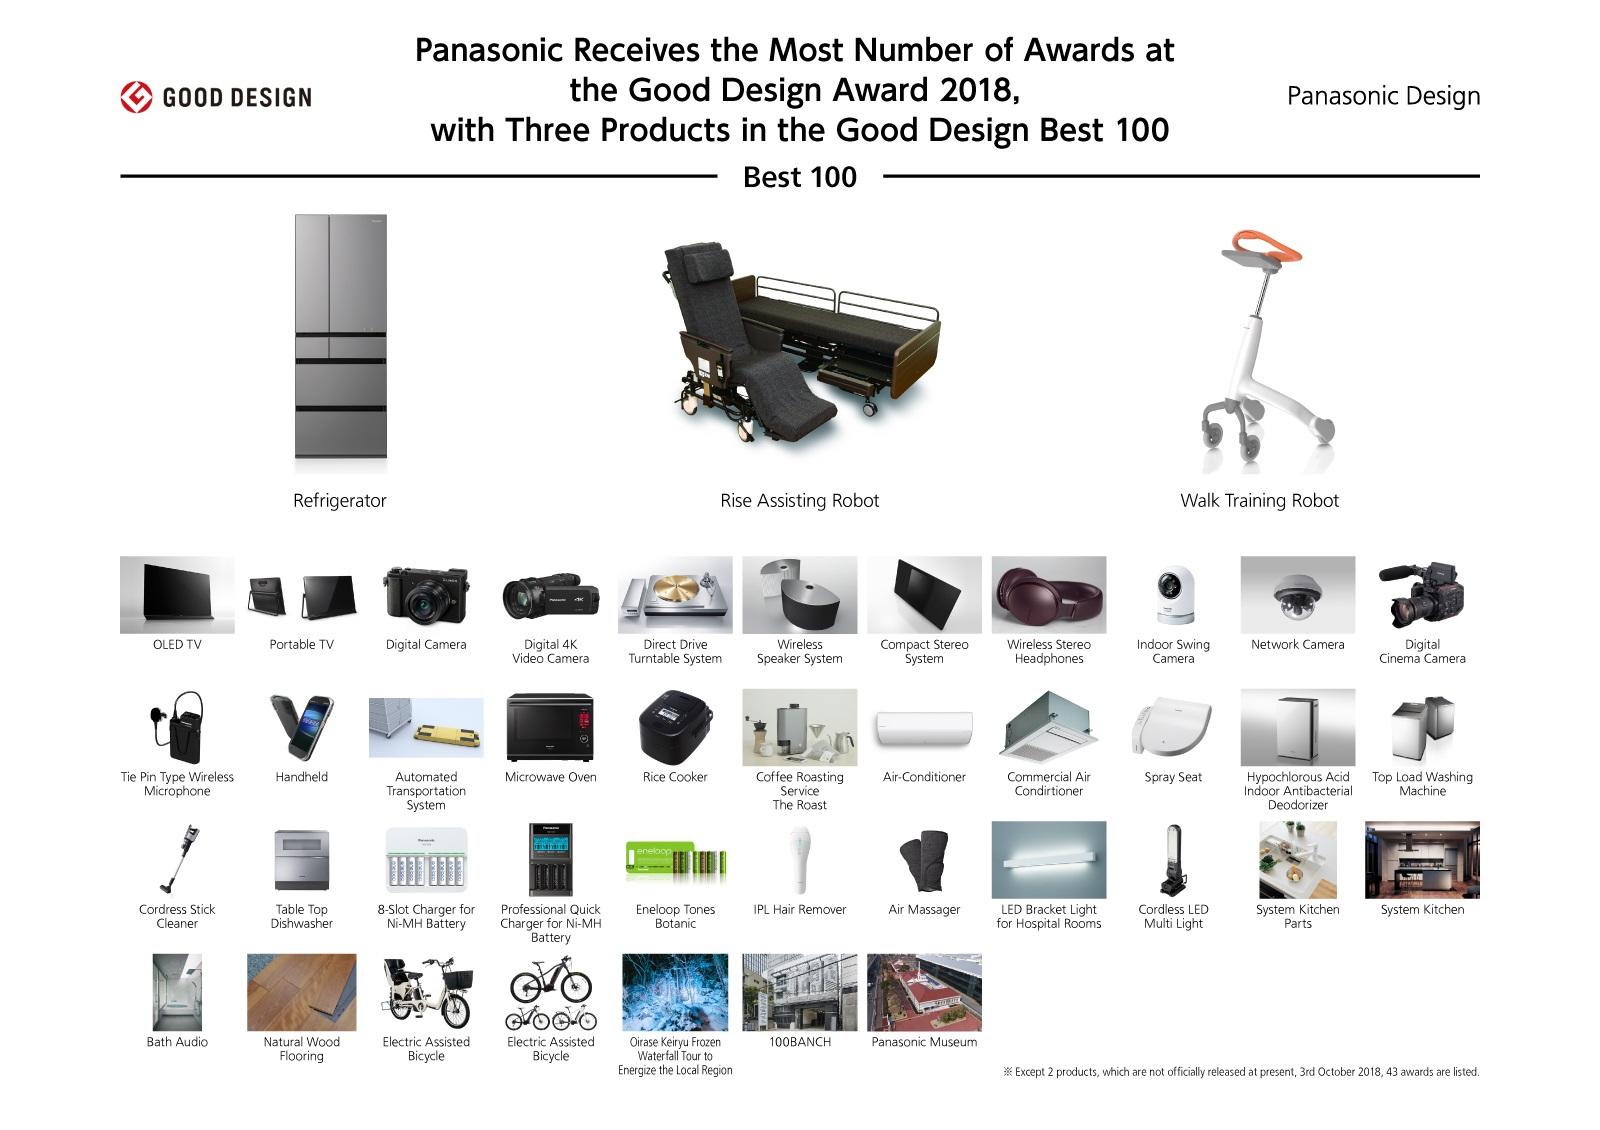 image: Panasonic receives the most number of awards at the Good Design Award 2018